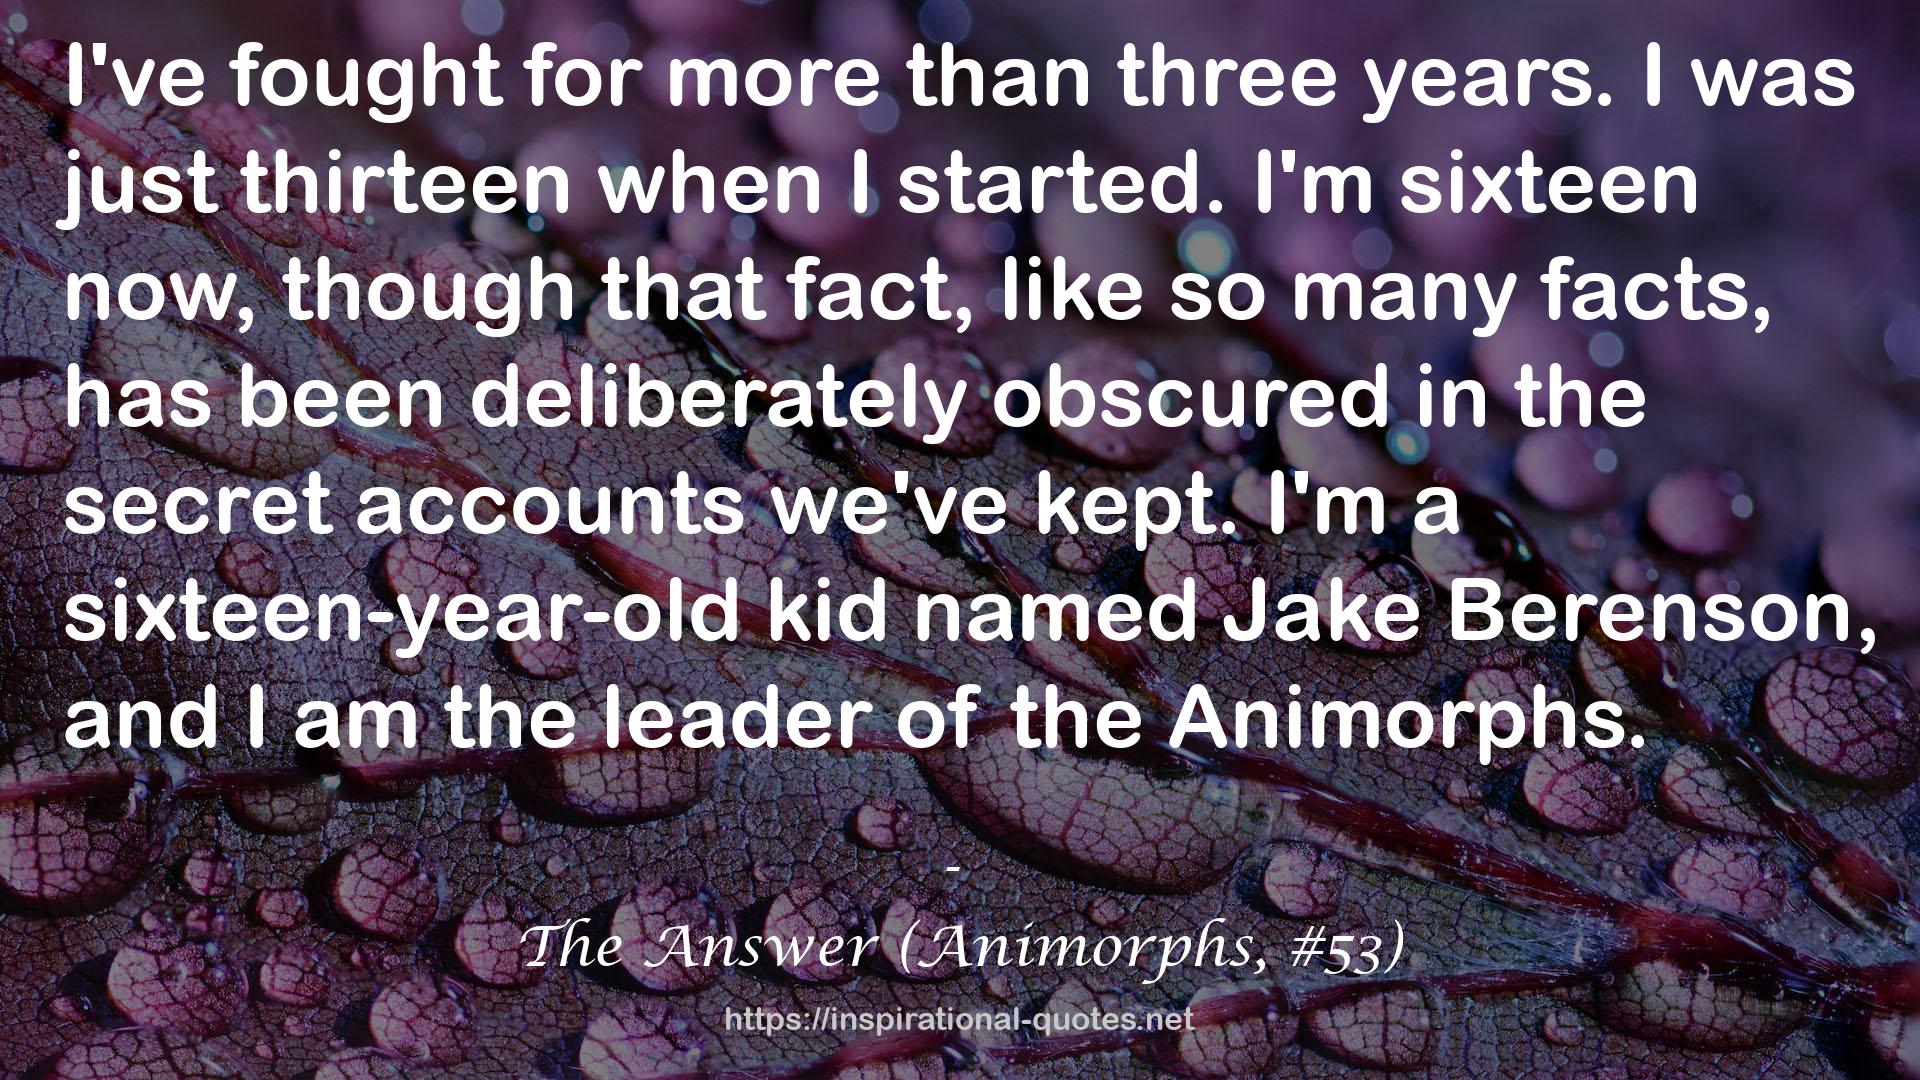 The Answer (Animorphs, #53) QUOTES